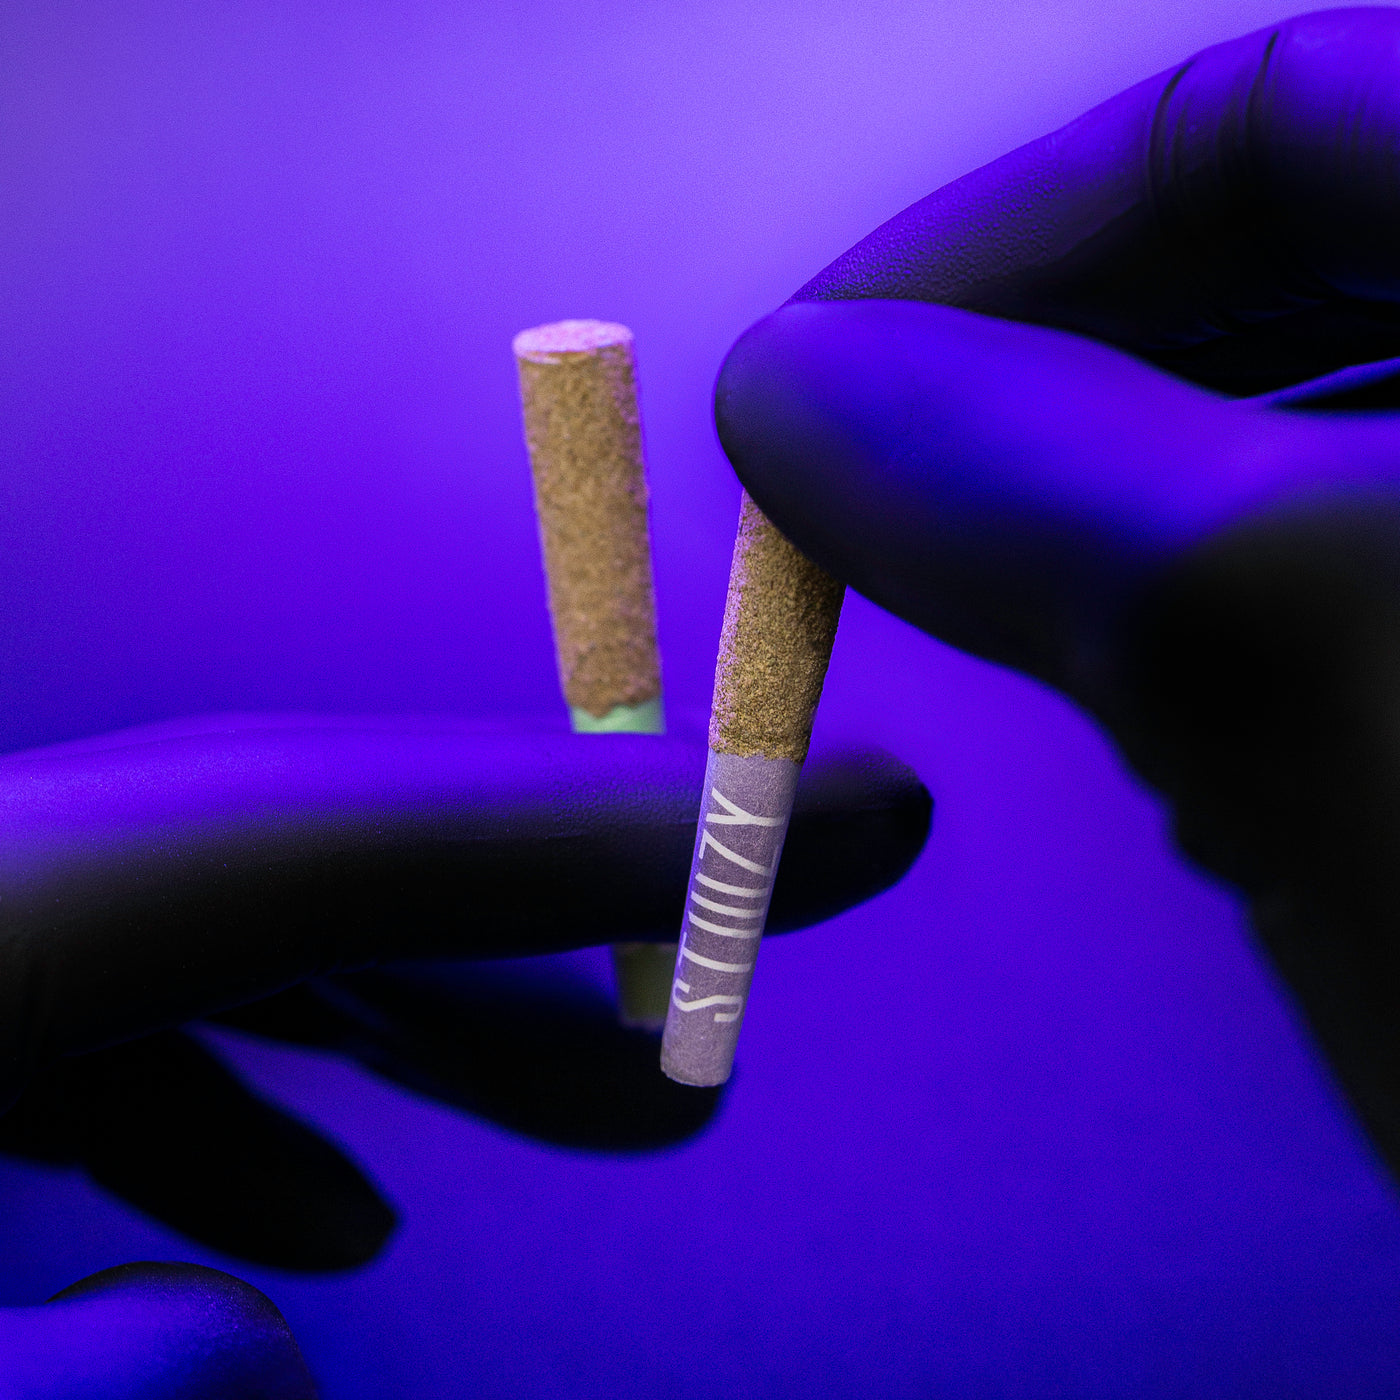 Infused pre-rolls are joints that combine cannabis flower and concentrates.